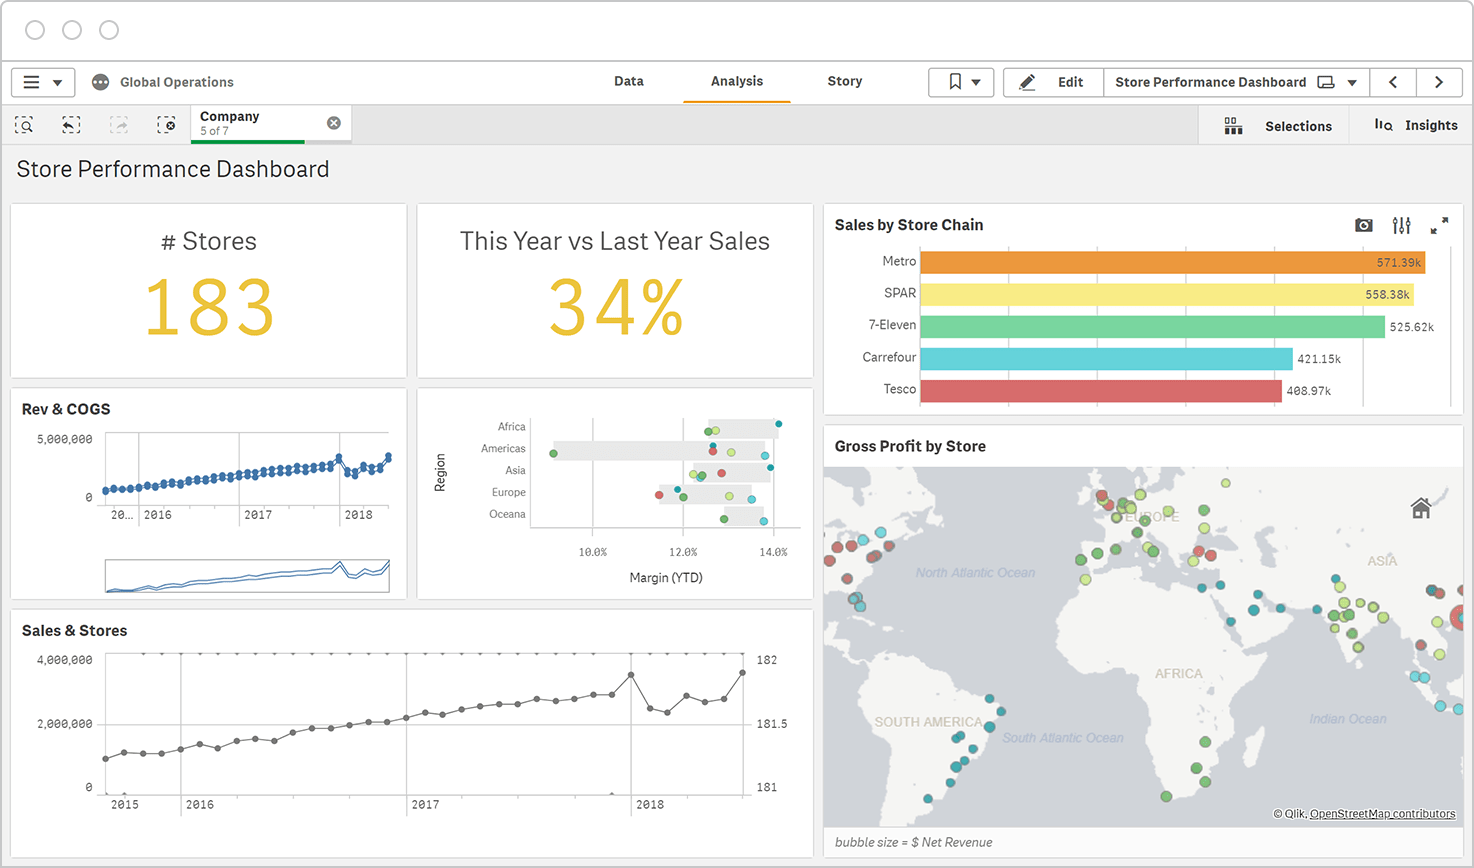 A dashboard showing store performance metrics, including the number of stores (183), sales comparison to last year (34%), sales by store chain, cost of goods sold, geographic sales distribution, and growth profit.